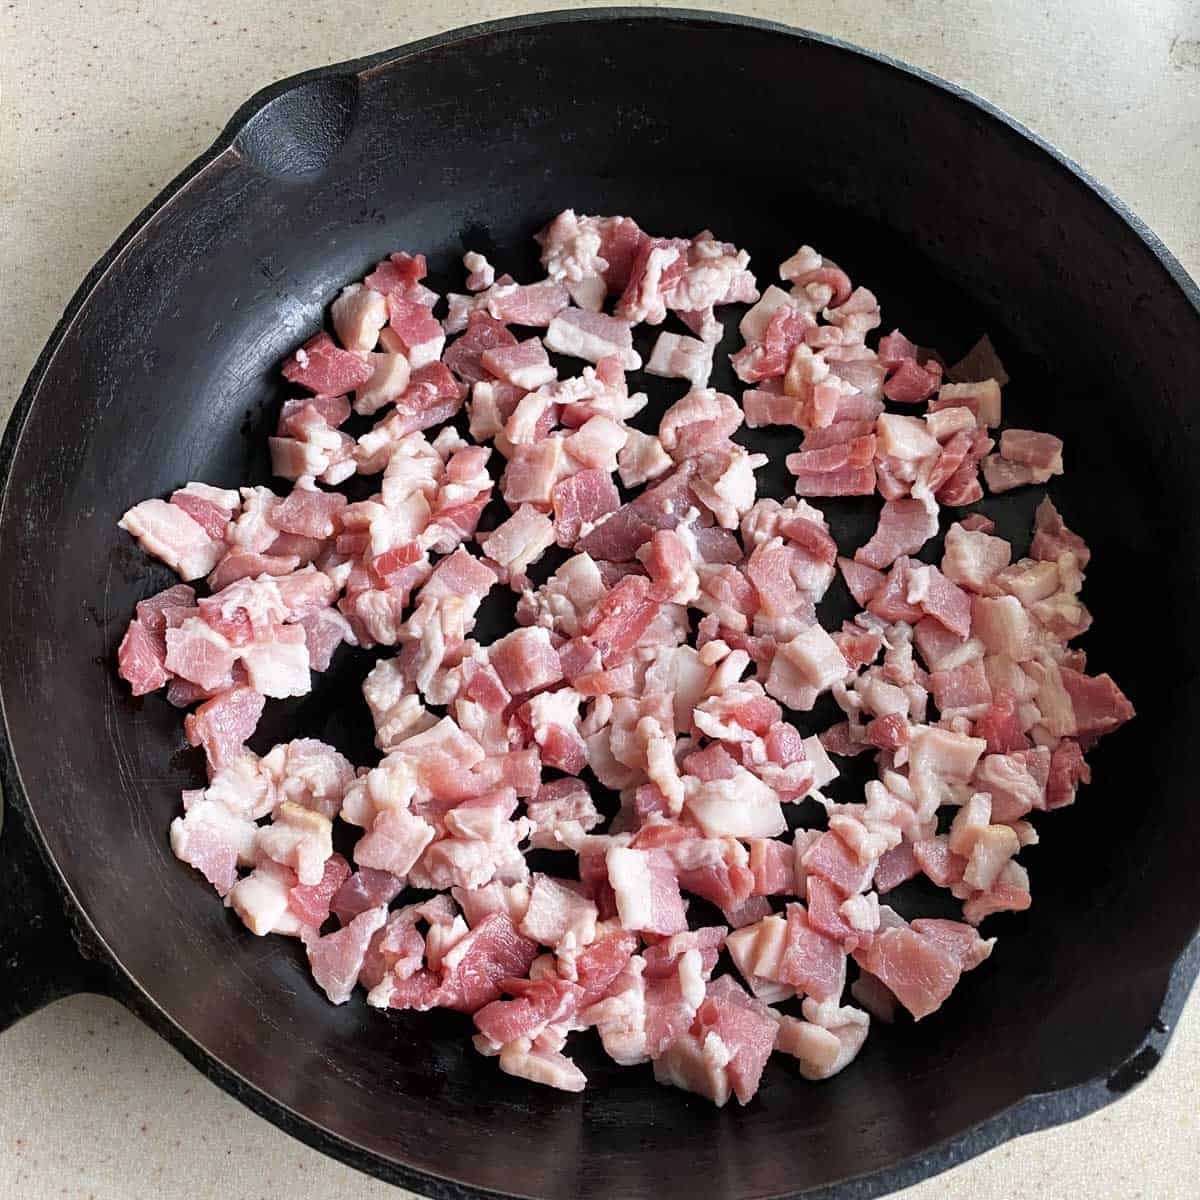 Chopped raw bacon in a black cast iron skillet.